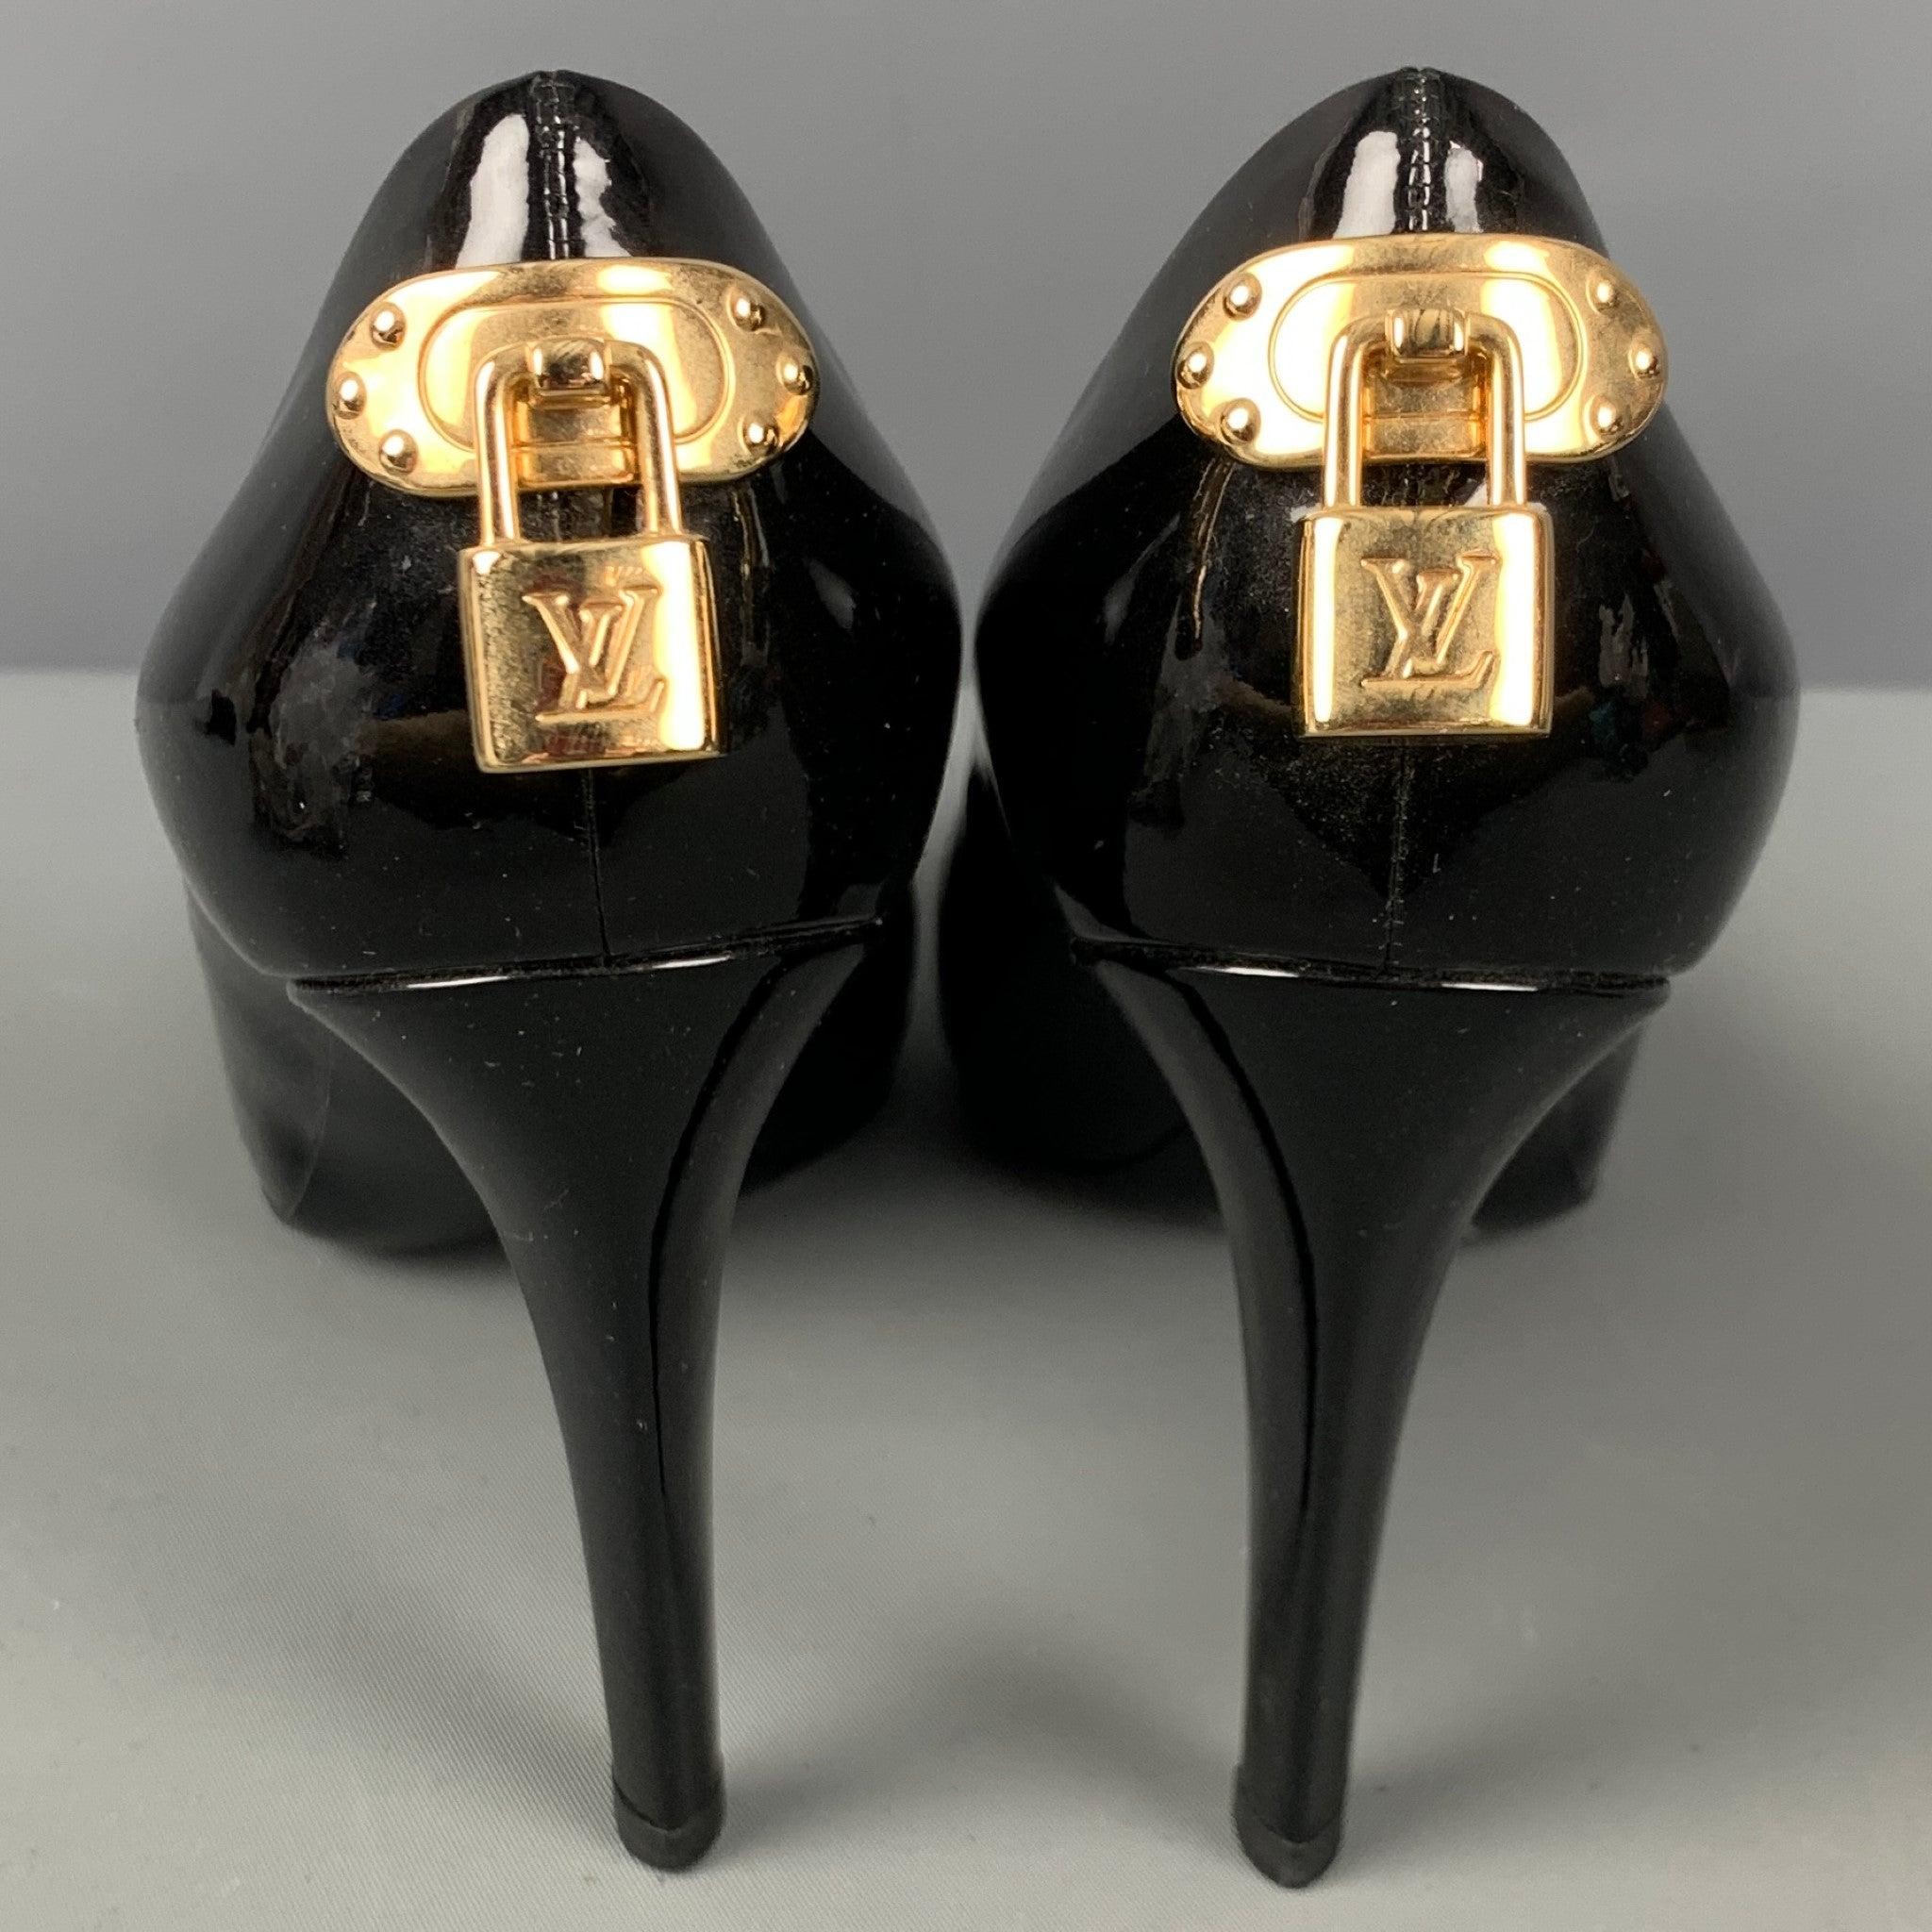 LOUIS VUITTON Size 7 Black Patent Leather Pumps In Good Condition For Sale In San Francisco, CA